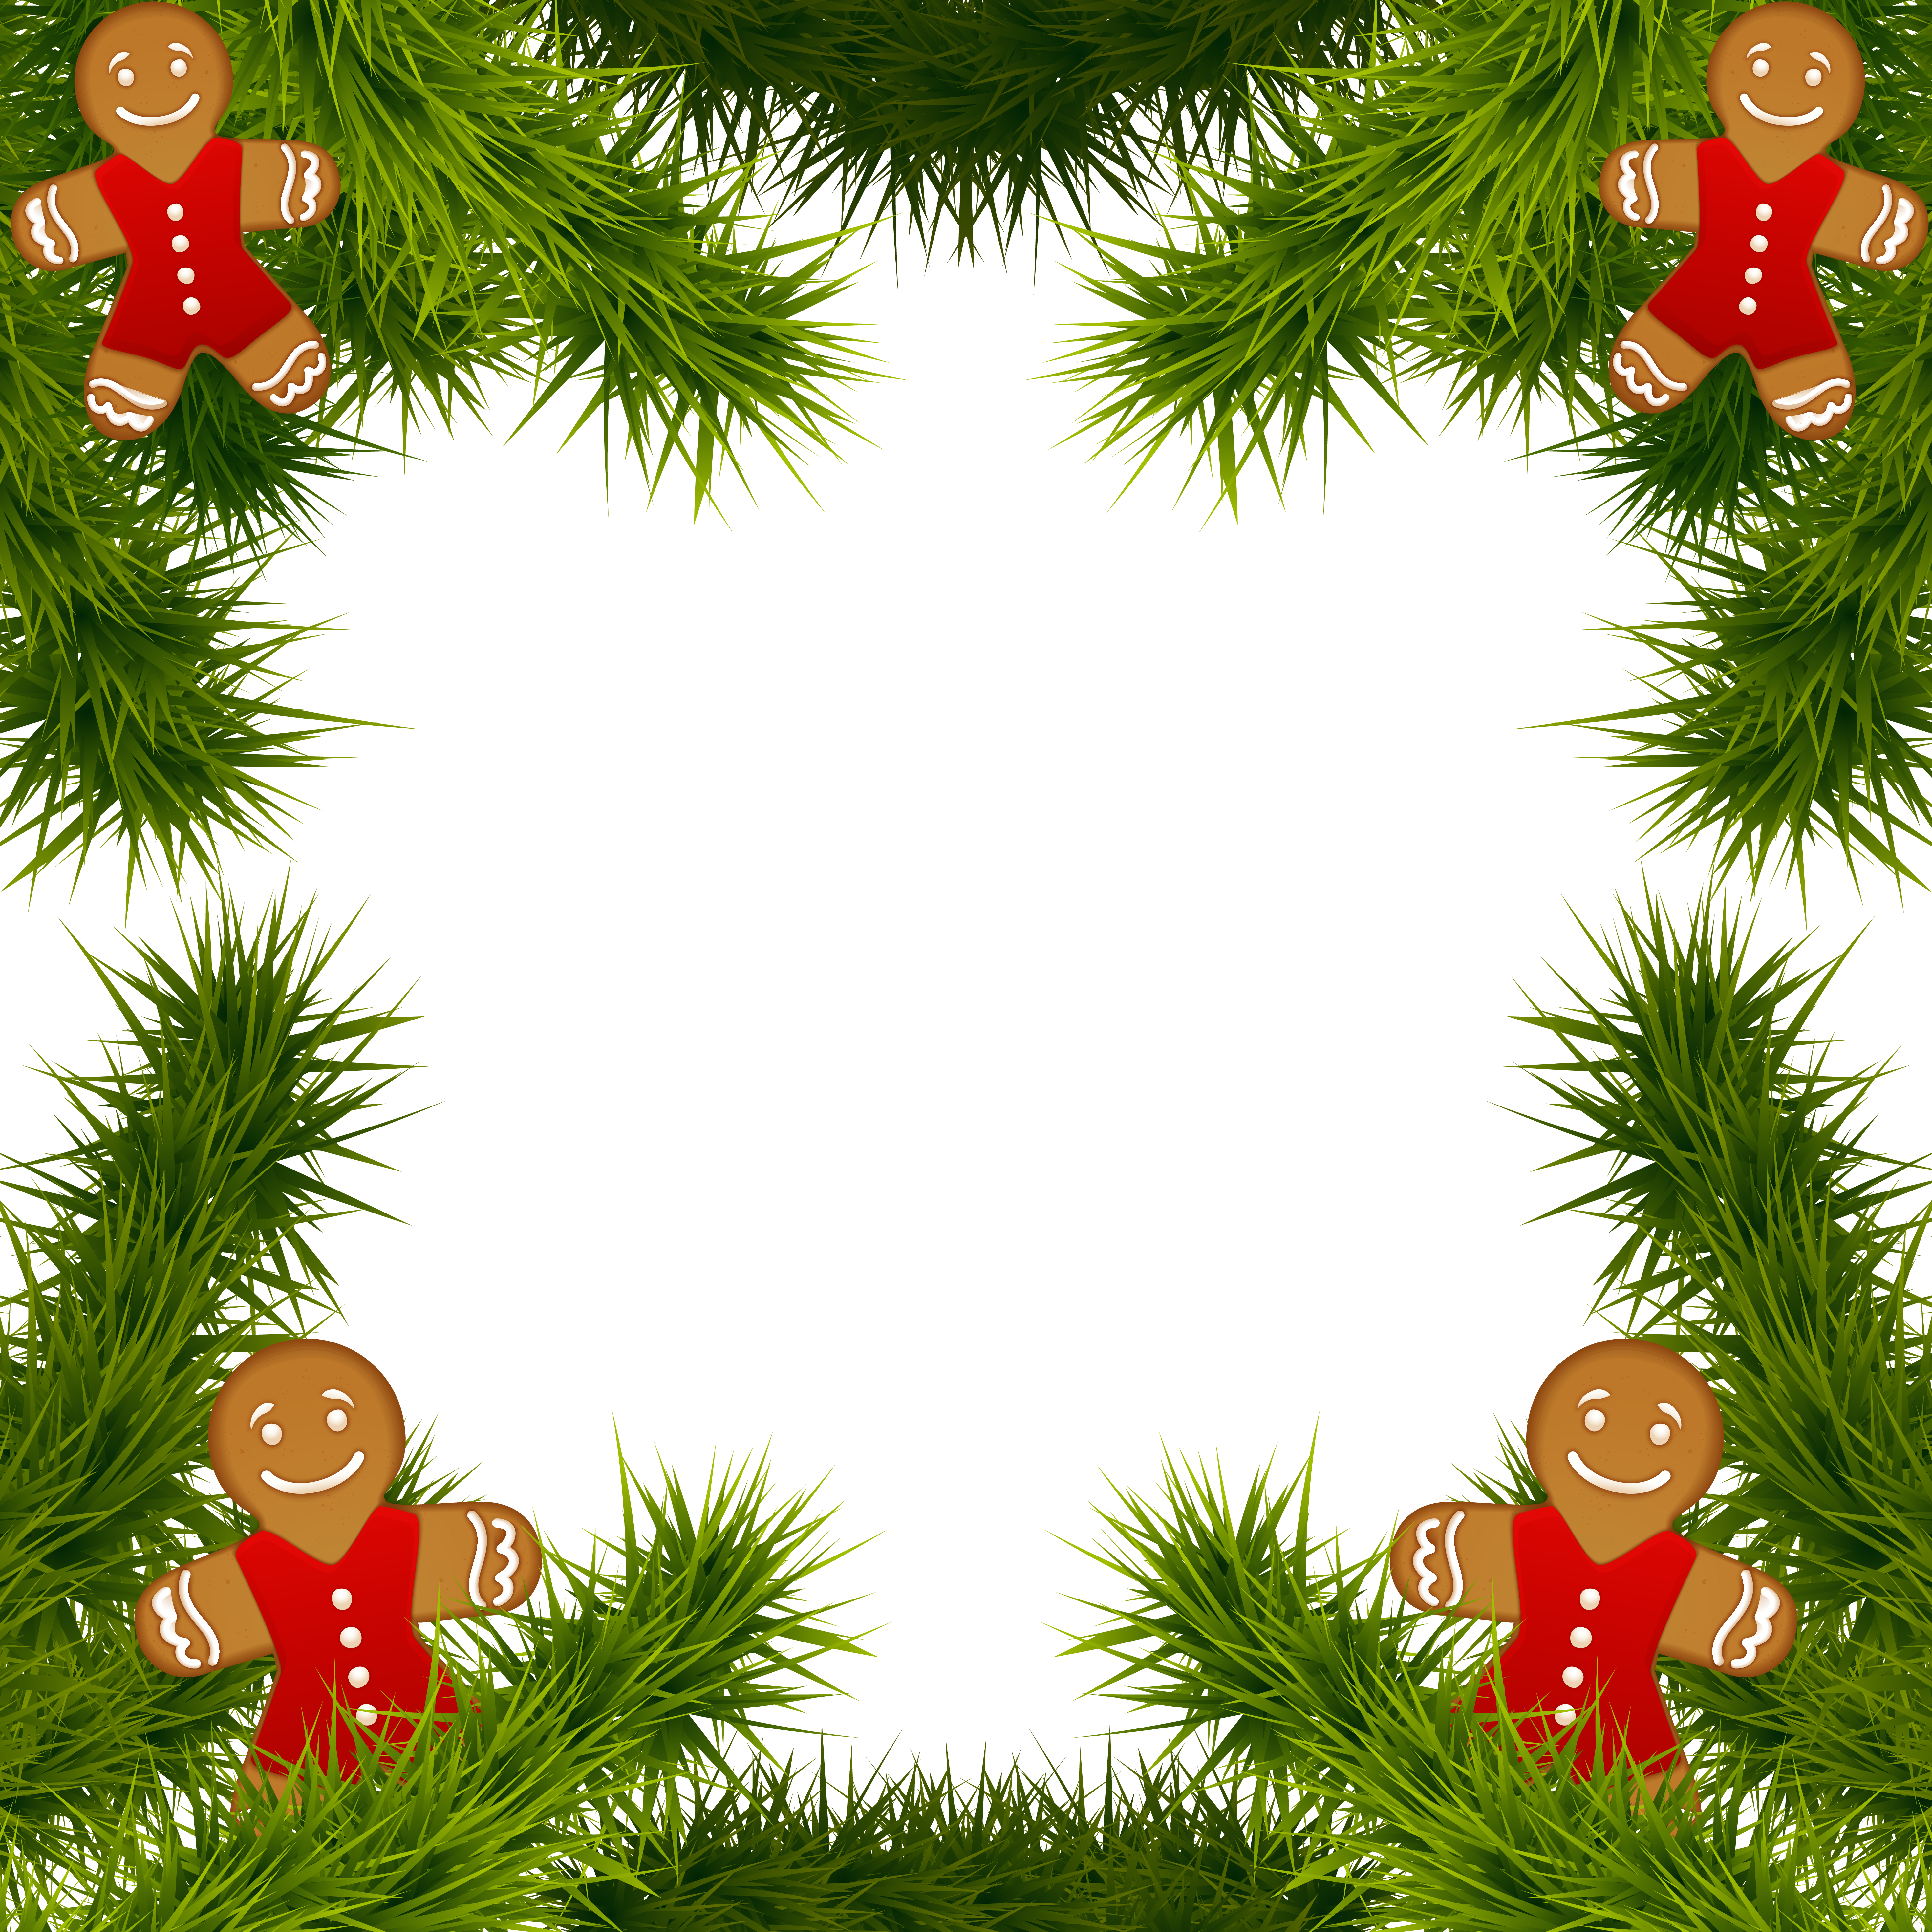 Christmas pine frame with. Gingerbread clipart vector